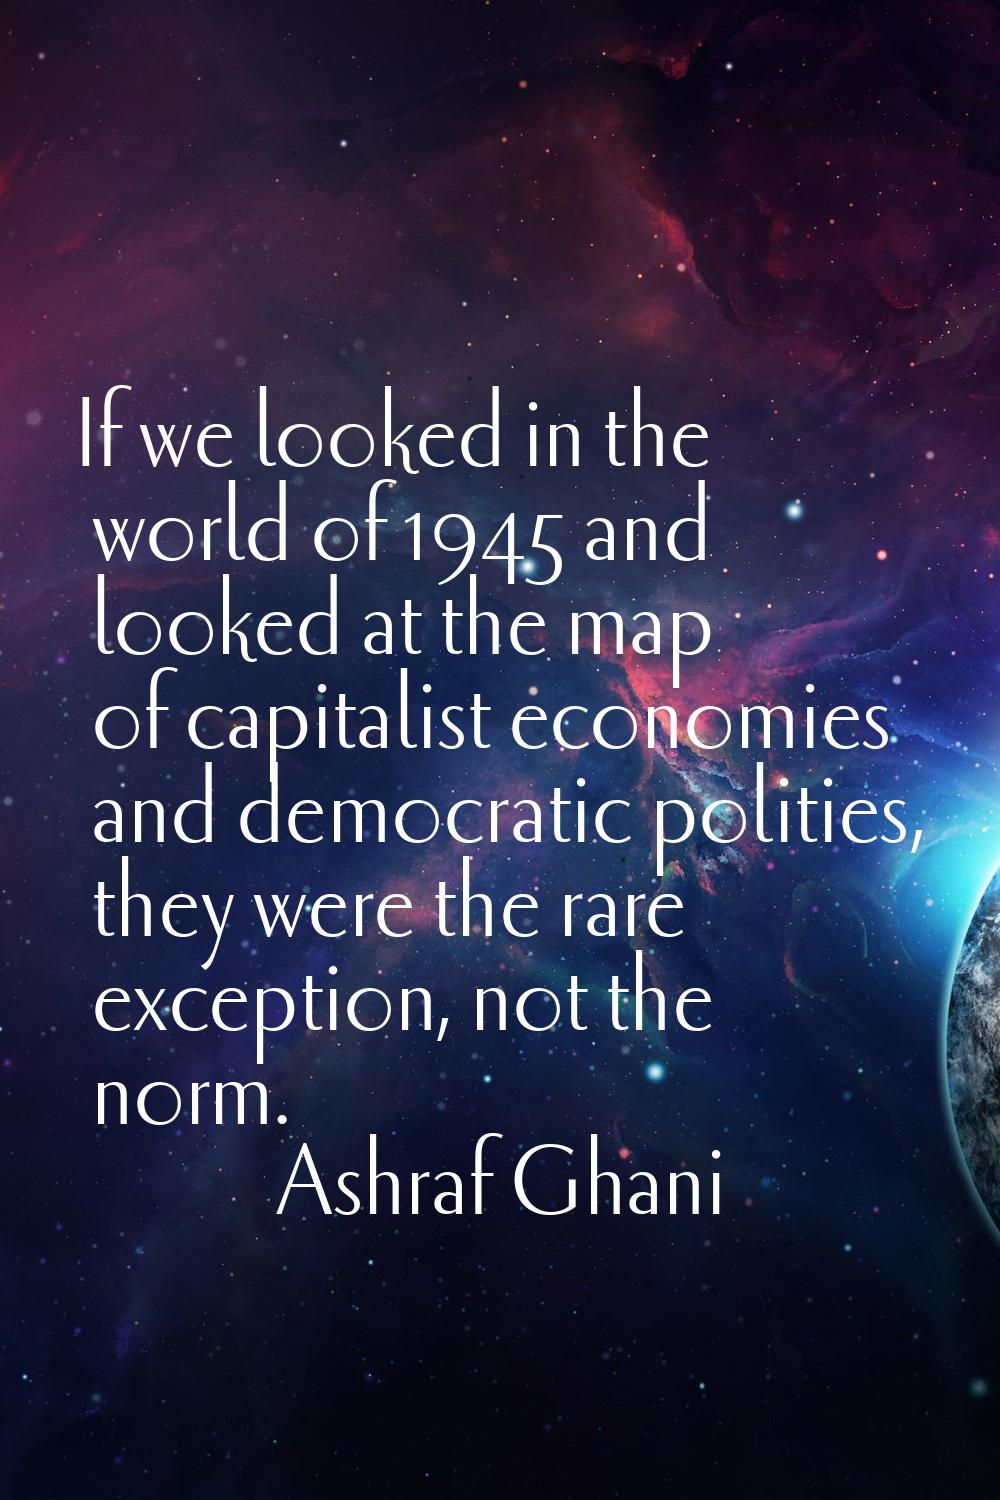 If we looked in the world of 1945 and looked at the map of capitalist economies and democratic poli